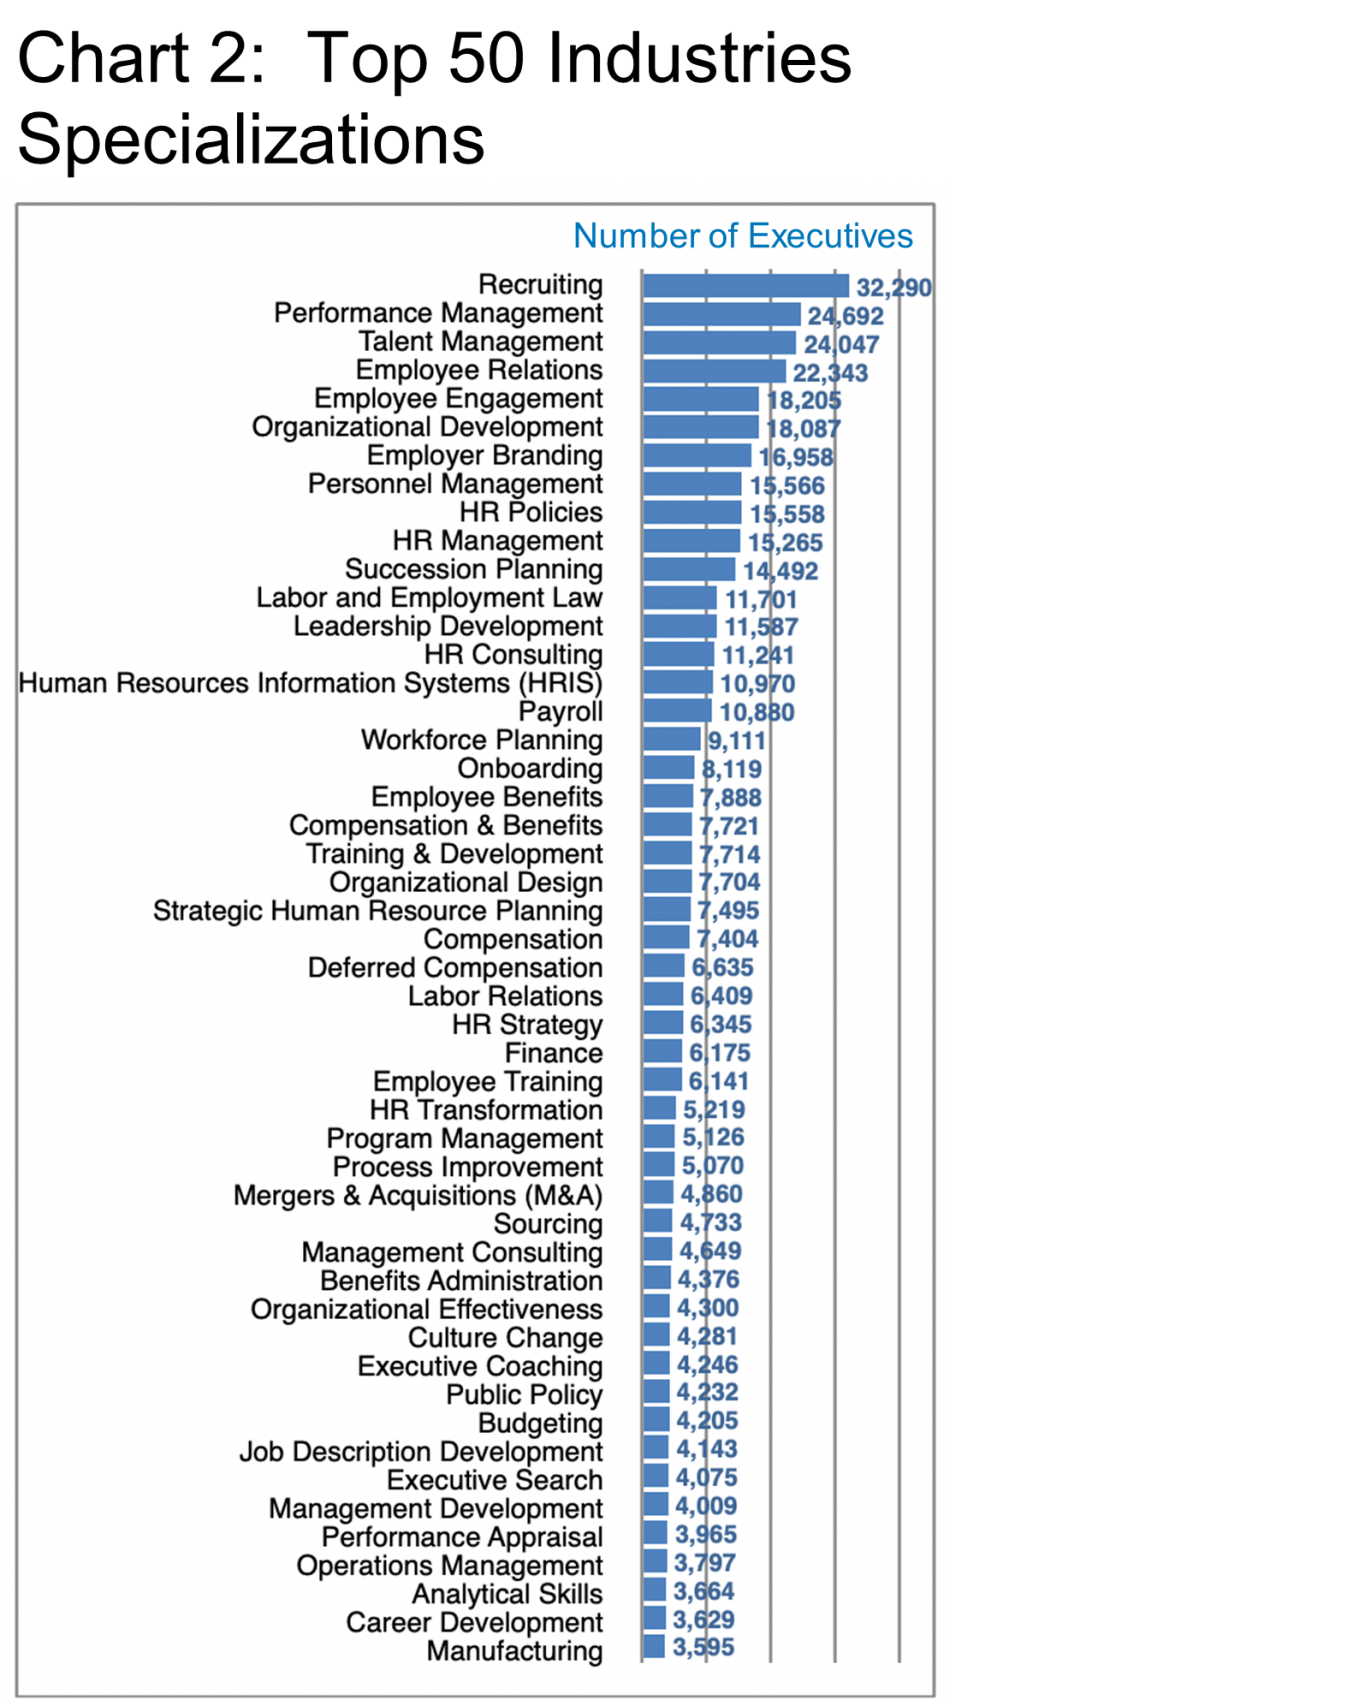 Chart_2_Top 50 Industries Specializations